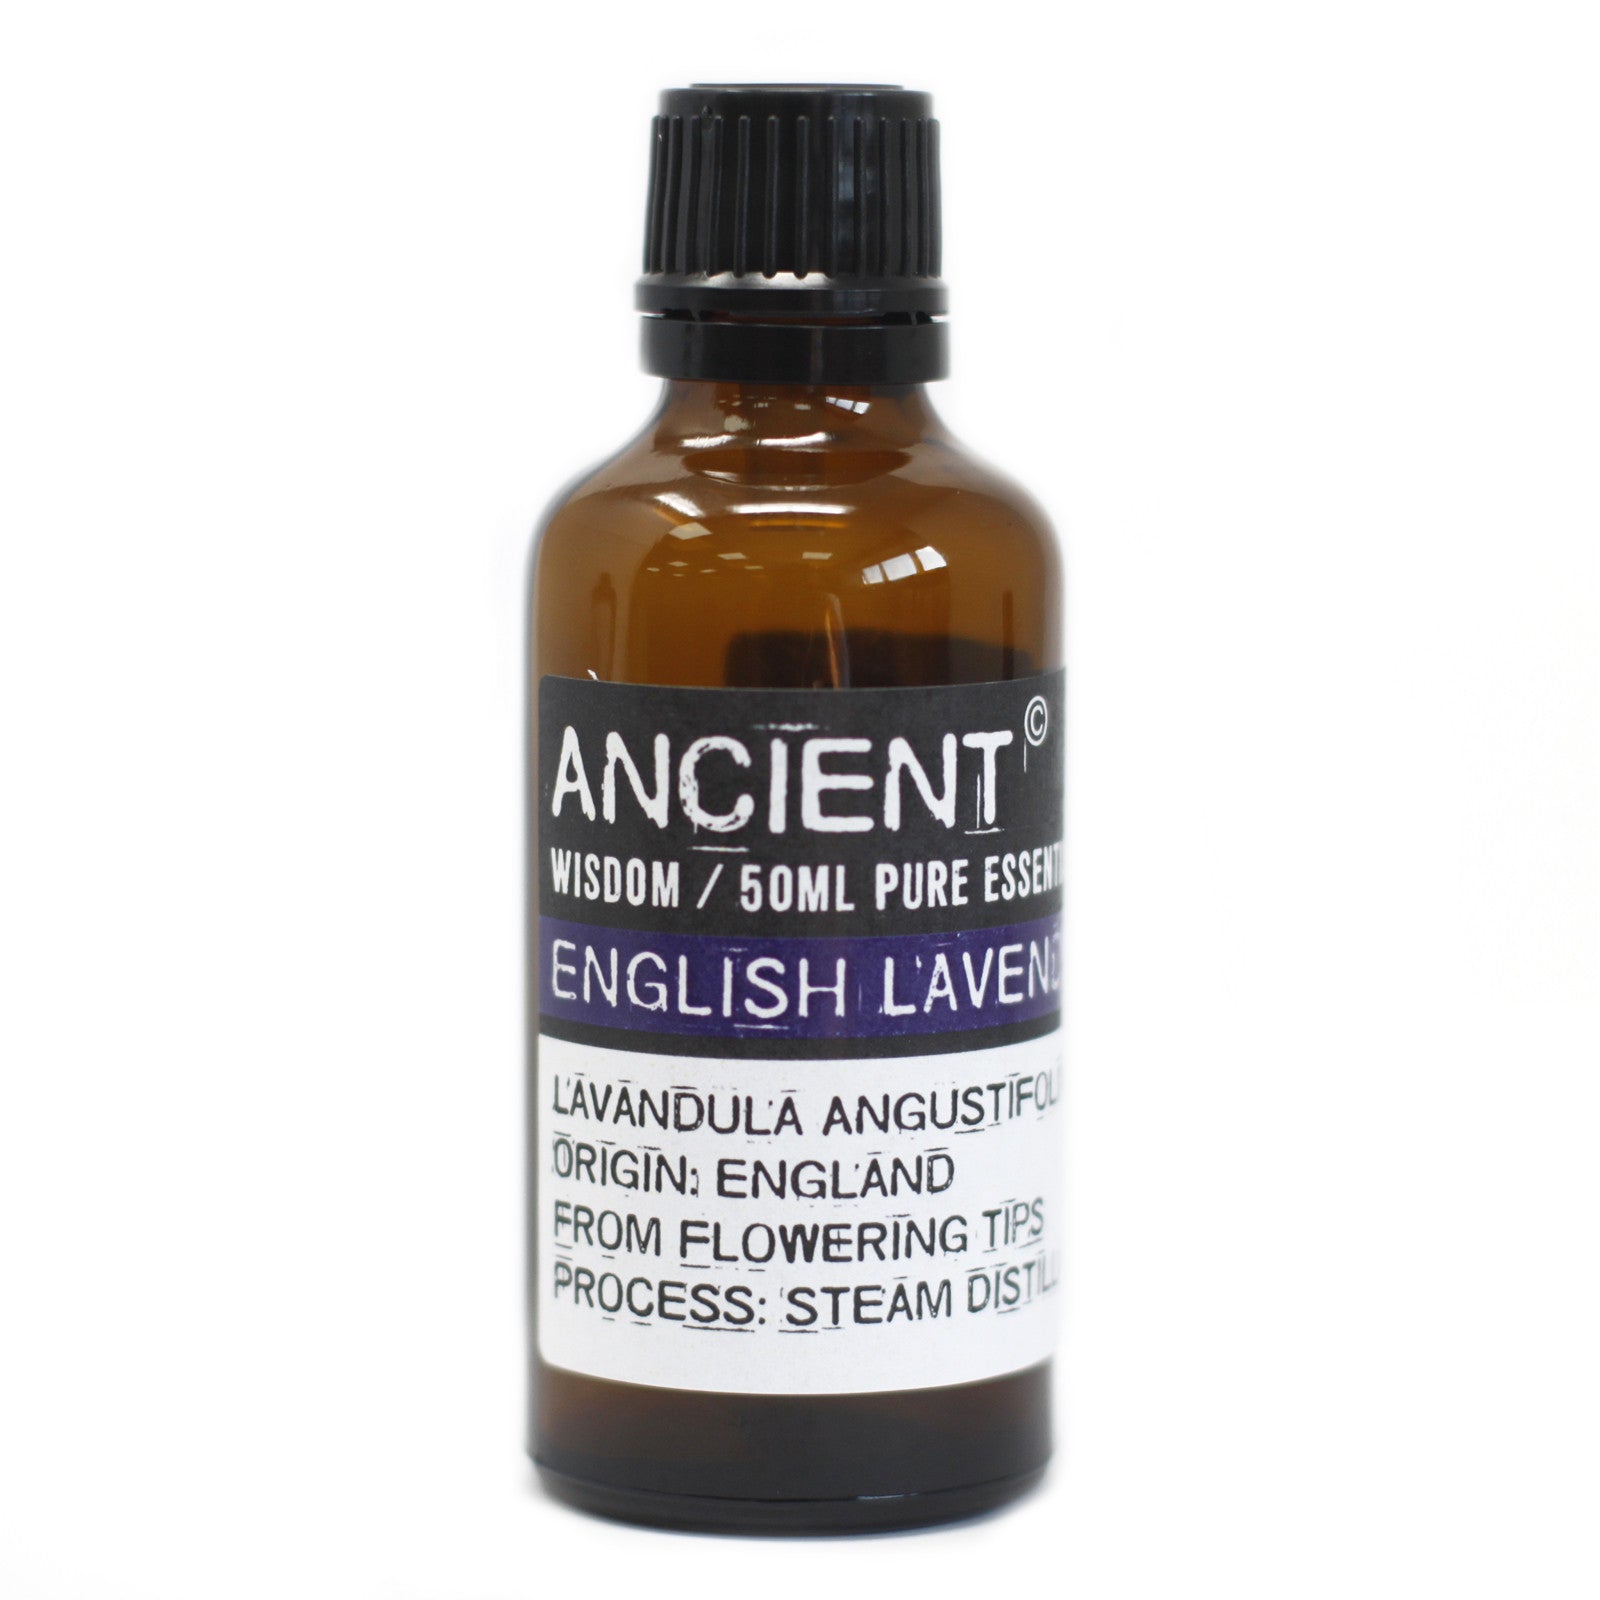 View English Lavender Essential Oil 50ml information